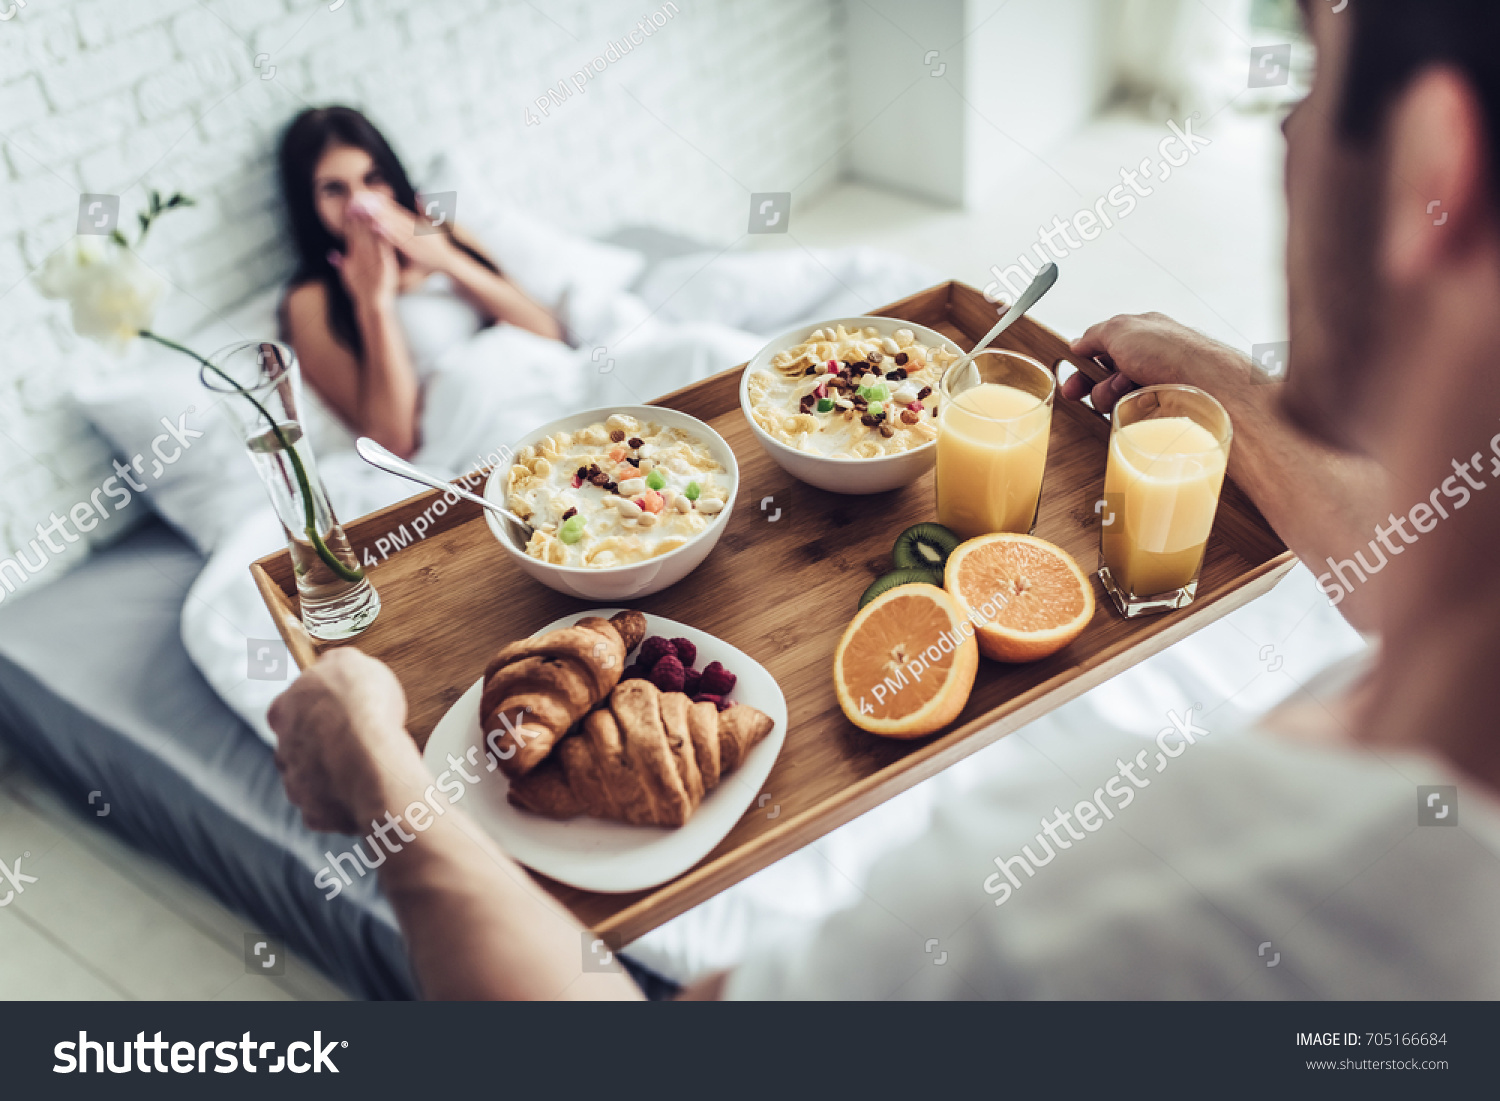 deangelo baker recommends pictures of breakfast in bed pic